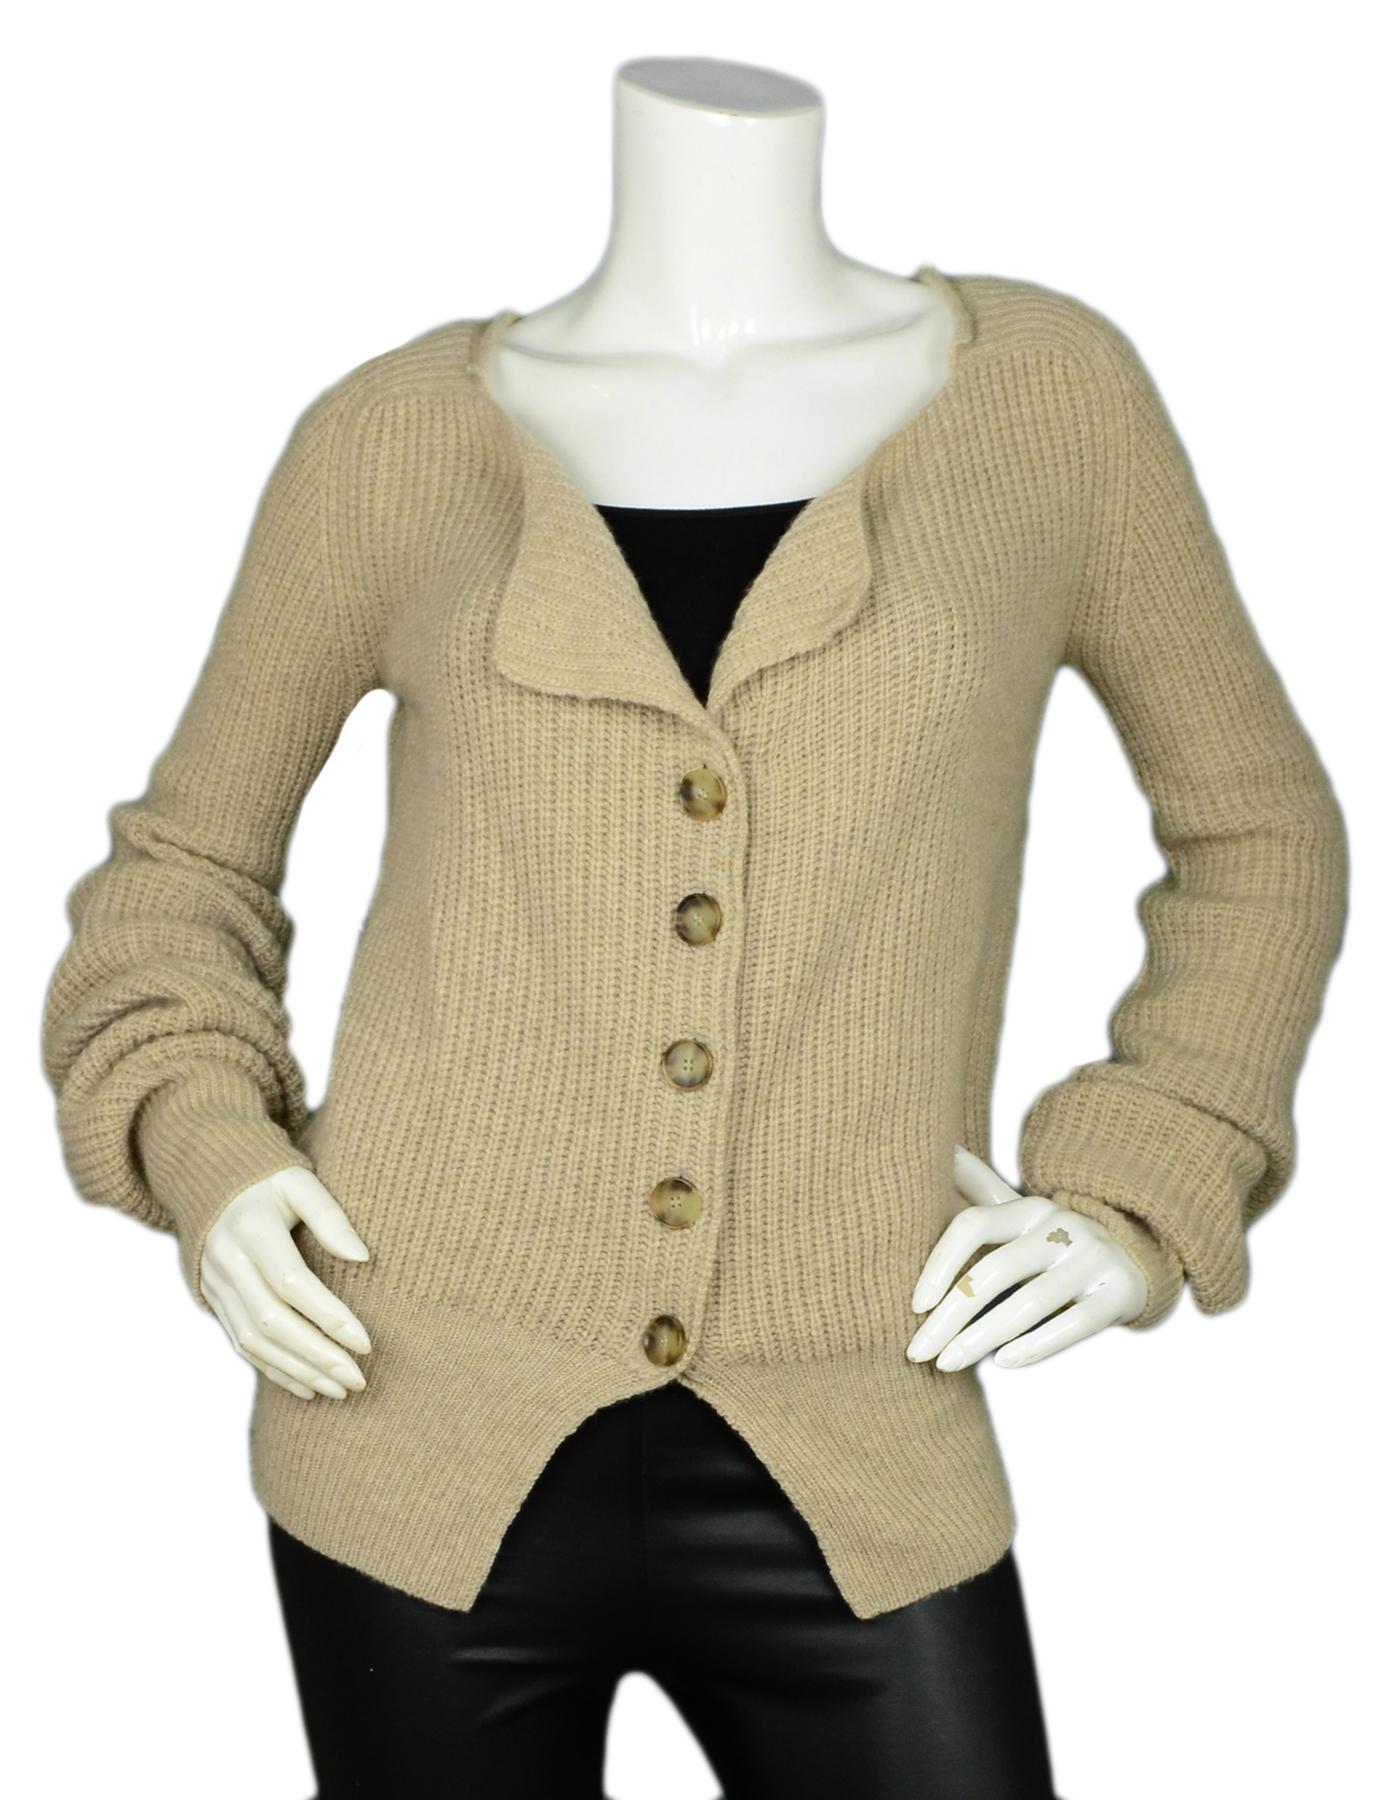 Stella McCartney Beige Knit Cashmere Cardigan Sweater sz IT38 

Made In: Italy
Color: Beige 
Materials: 100% Cashmere
Lining: 100% Cashmere 
Opening/Closure: Front button
Overall Condition: Excellent pre-owned condition 

Tag Size: IT 38/US 2